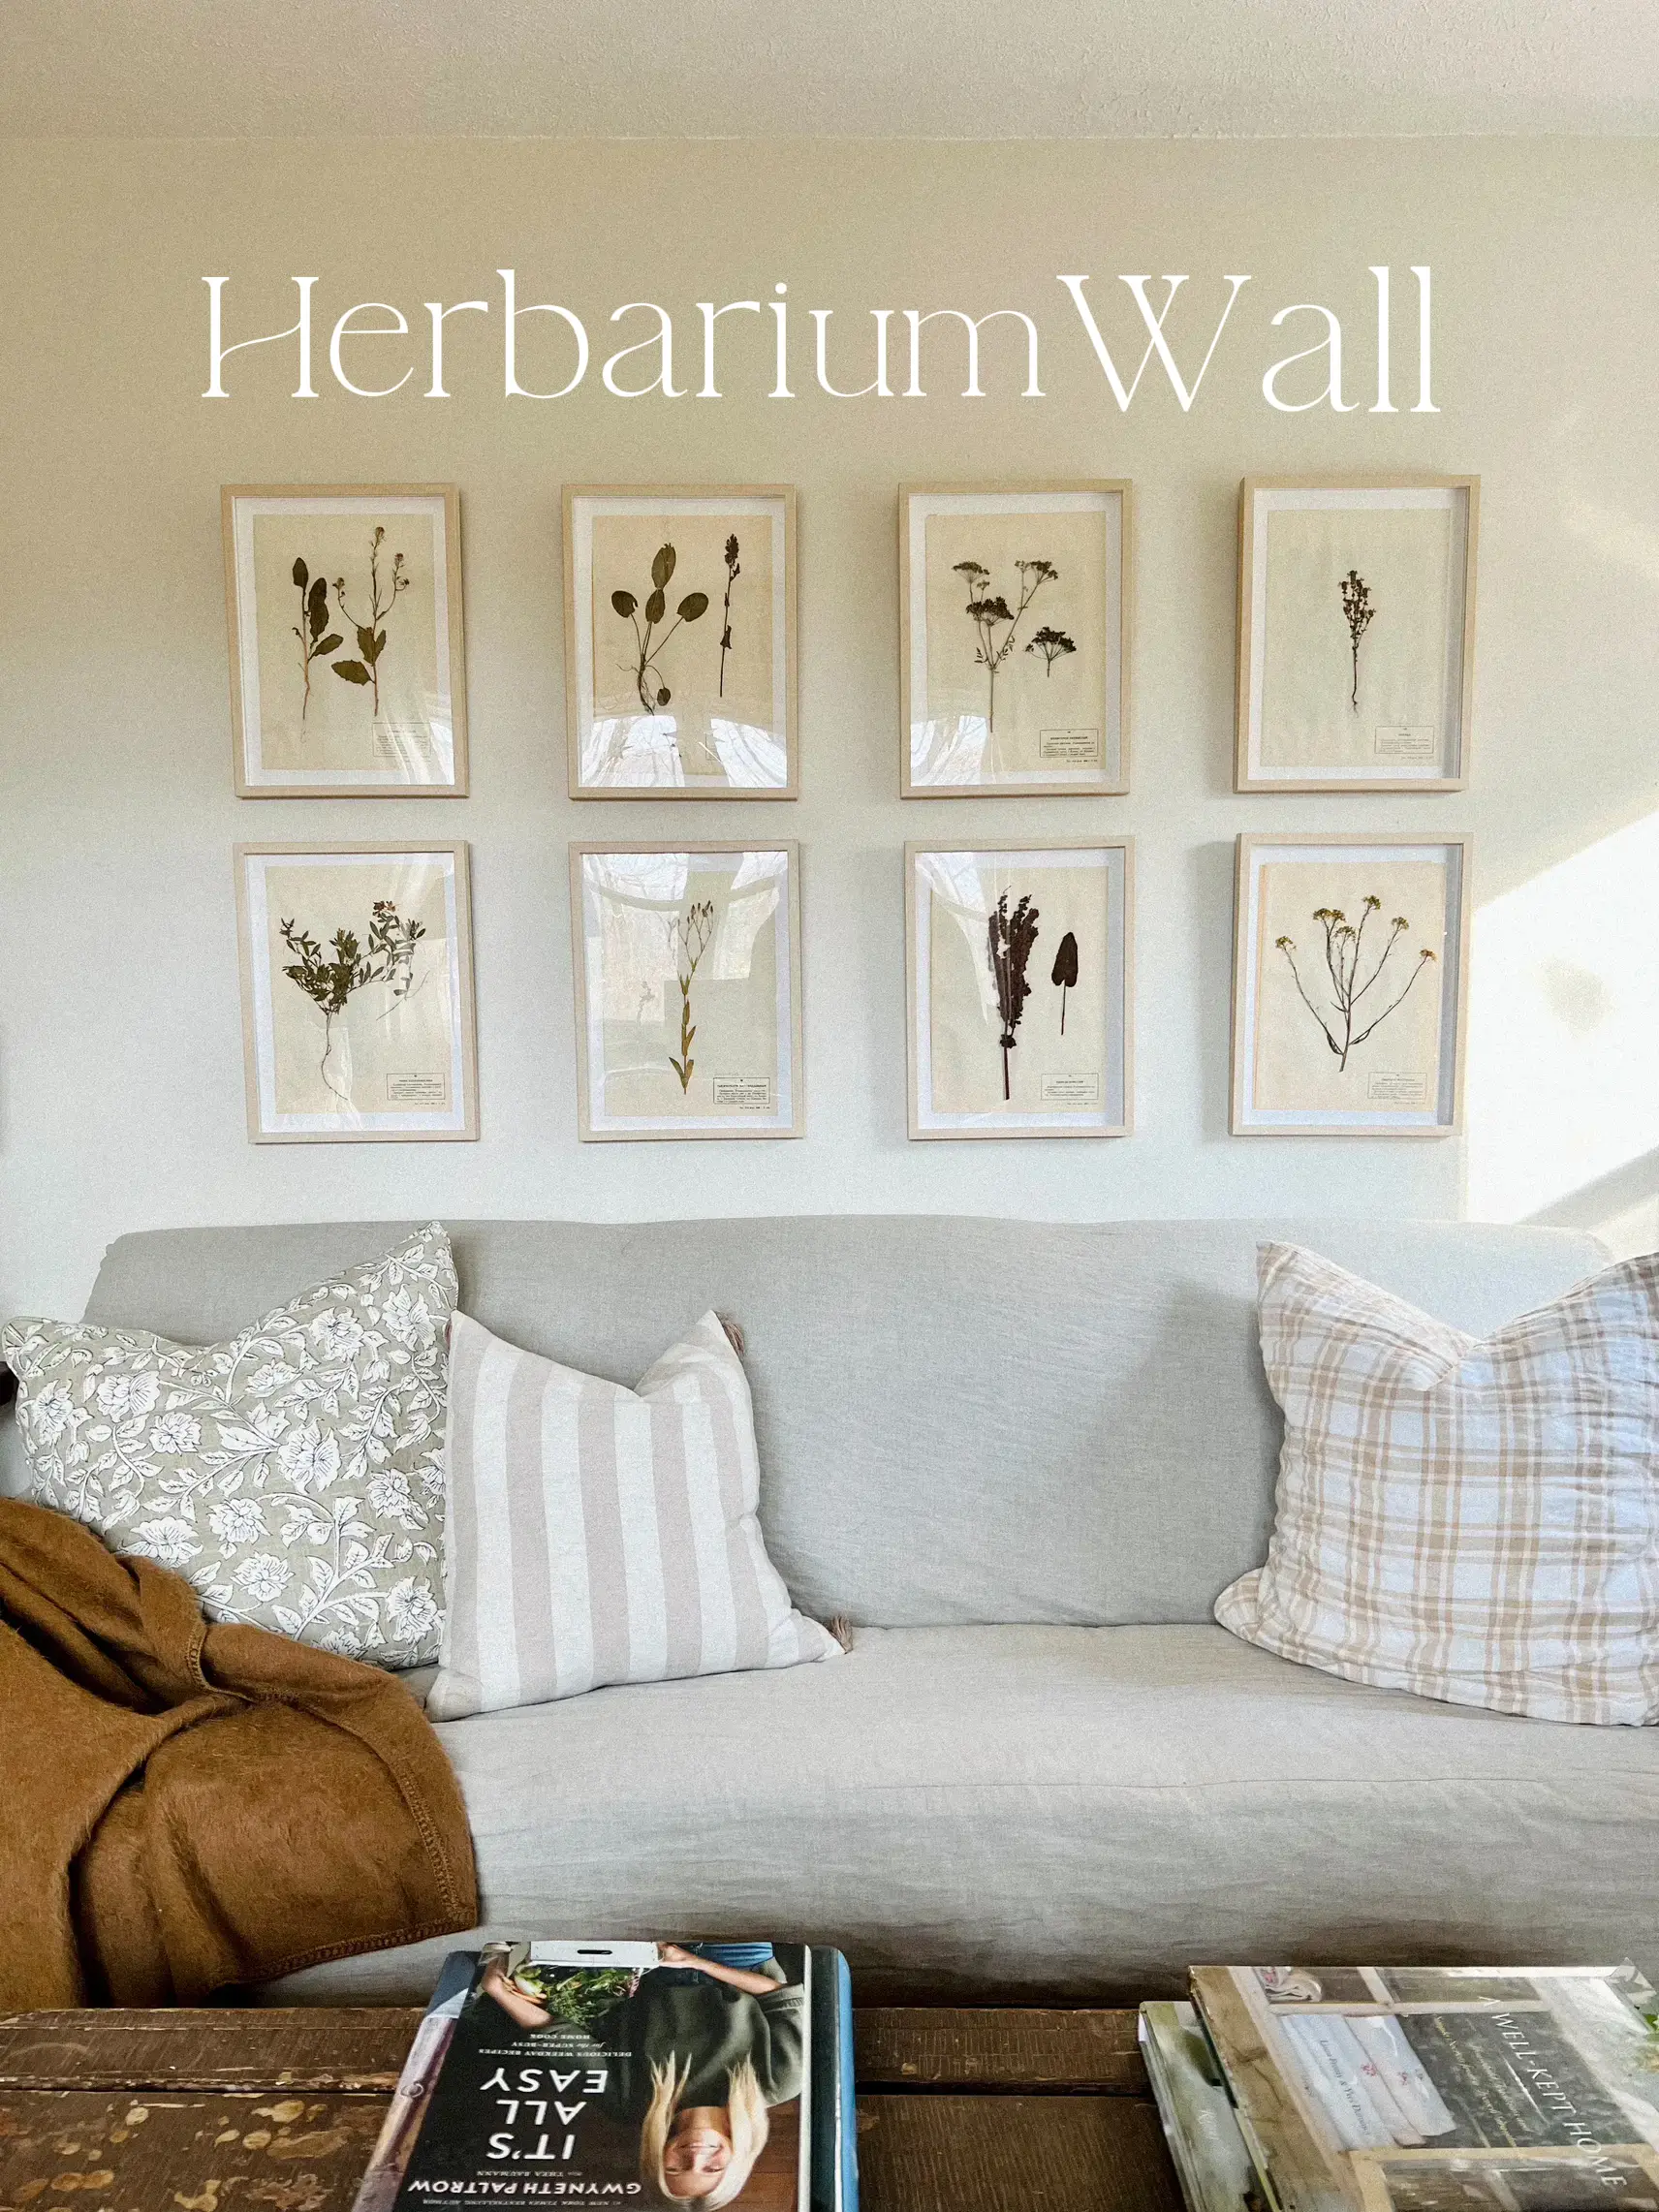 The Herbarium Wall, Gallery posted by Logan Dovel